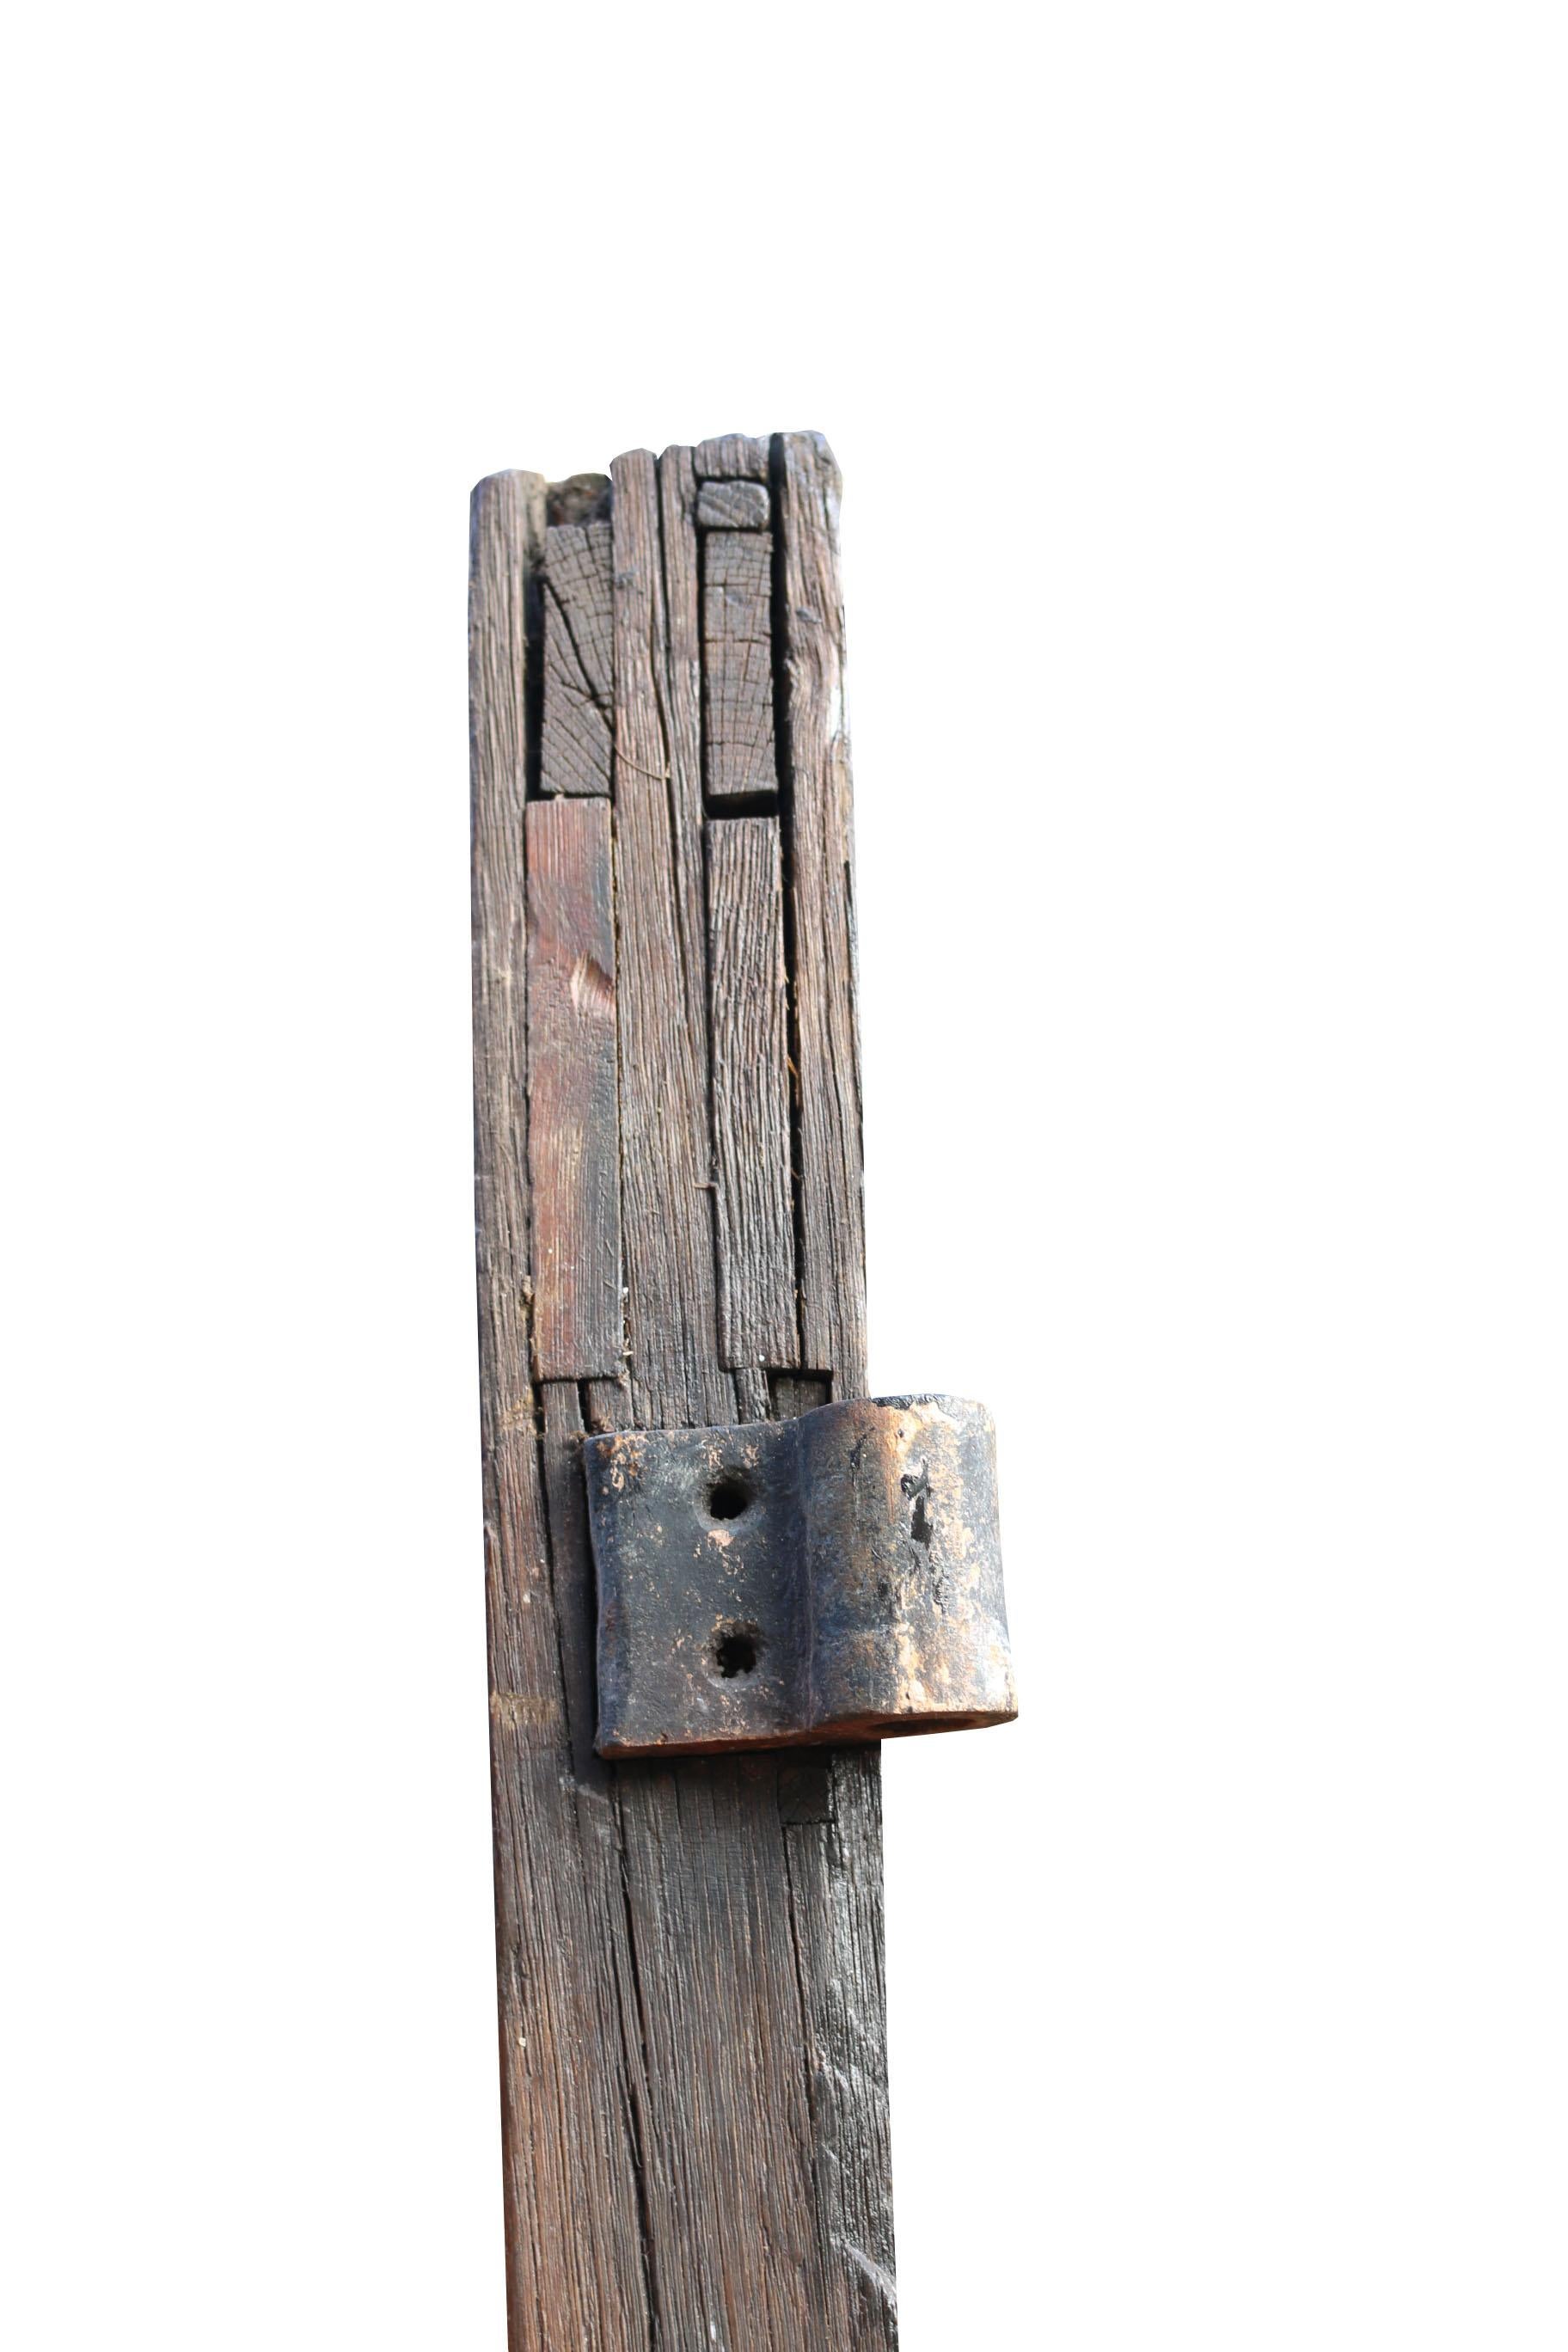 This door is solid oak and is in good condition for its age. There is a bend to one side and weathering to the base, which could be replaced. 

Measures: Height 221 cm

Width 134.5 cm (excluding hinges)

Depth 9 cm 

Weight 128 kg.